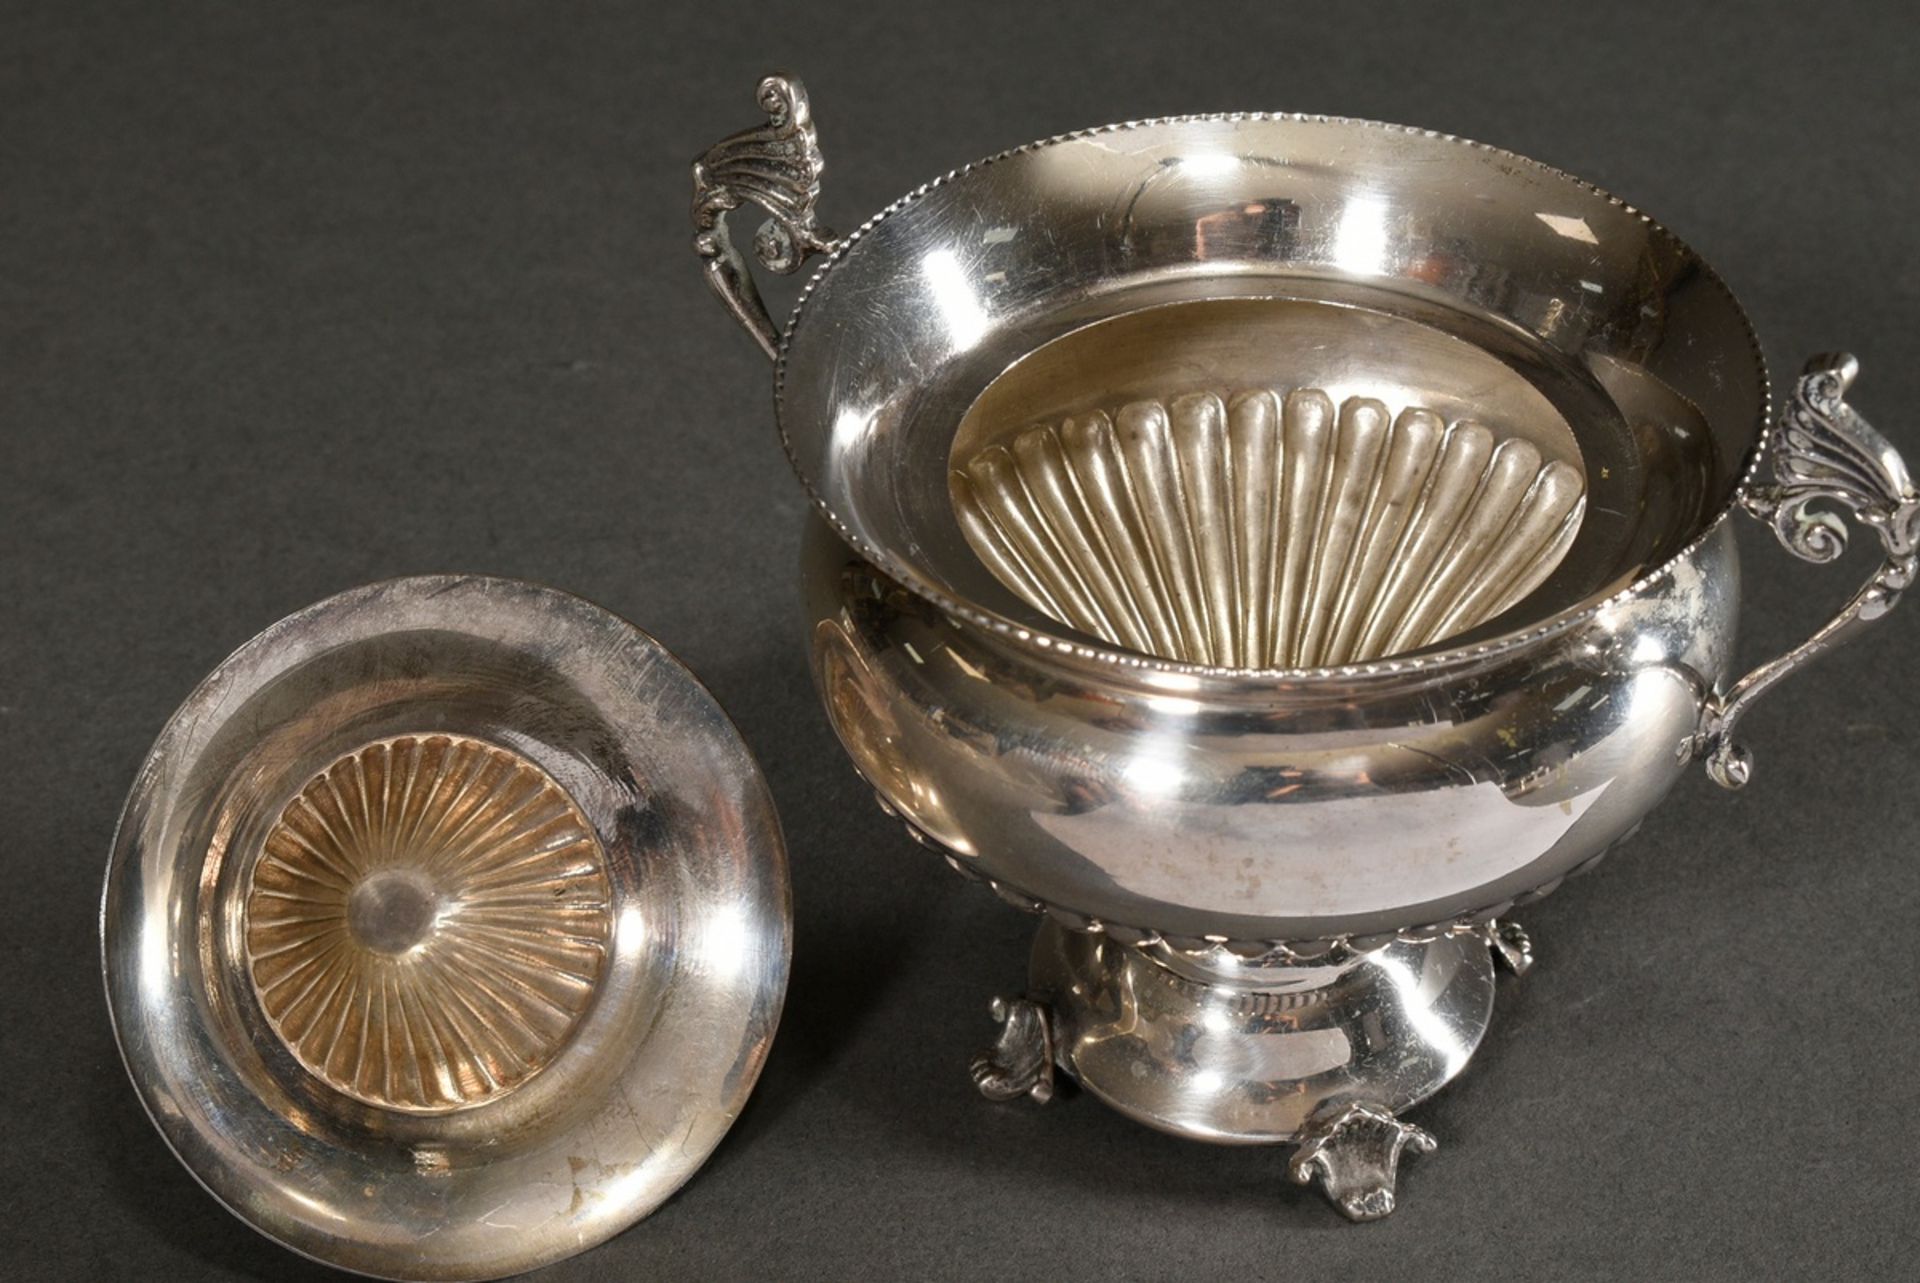 2 Miscellaneous pieces Top and lidded pot with classical grooved decoration and openwork rim, silve - Image 6 of 7